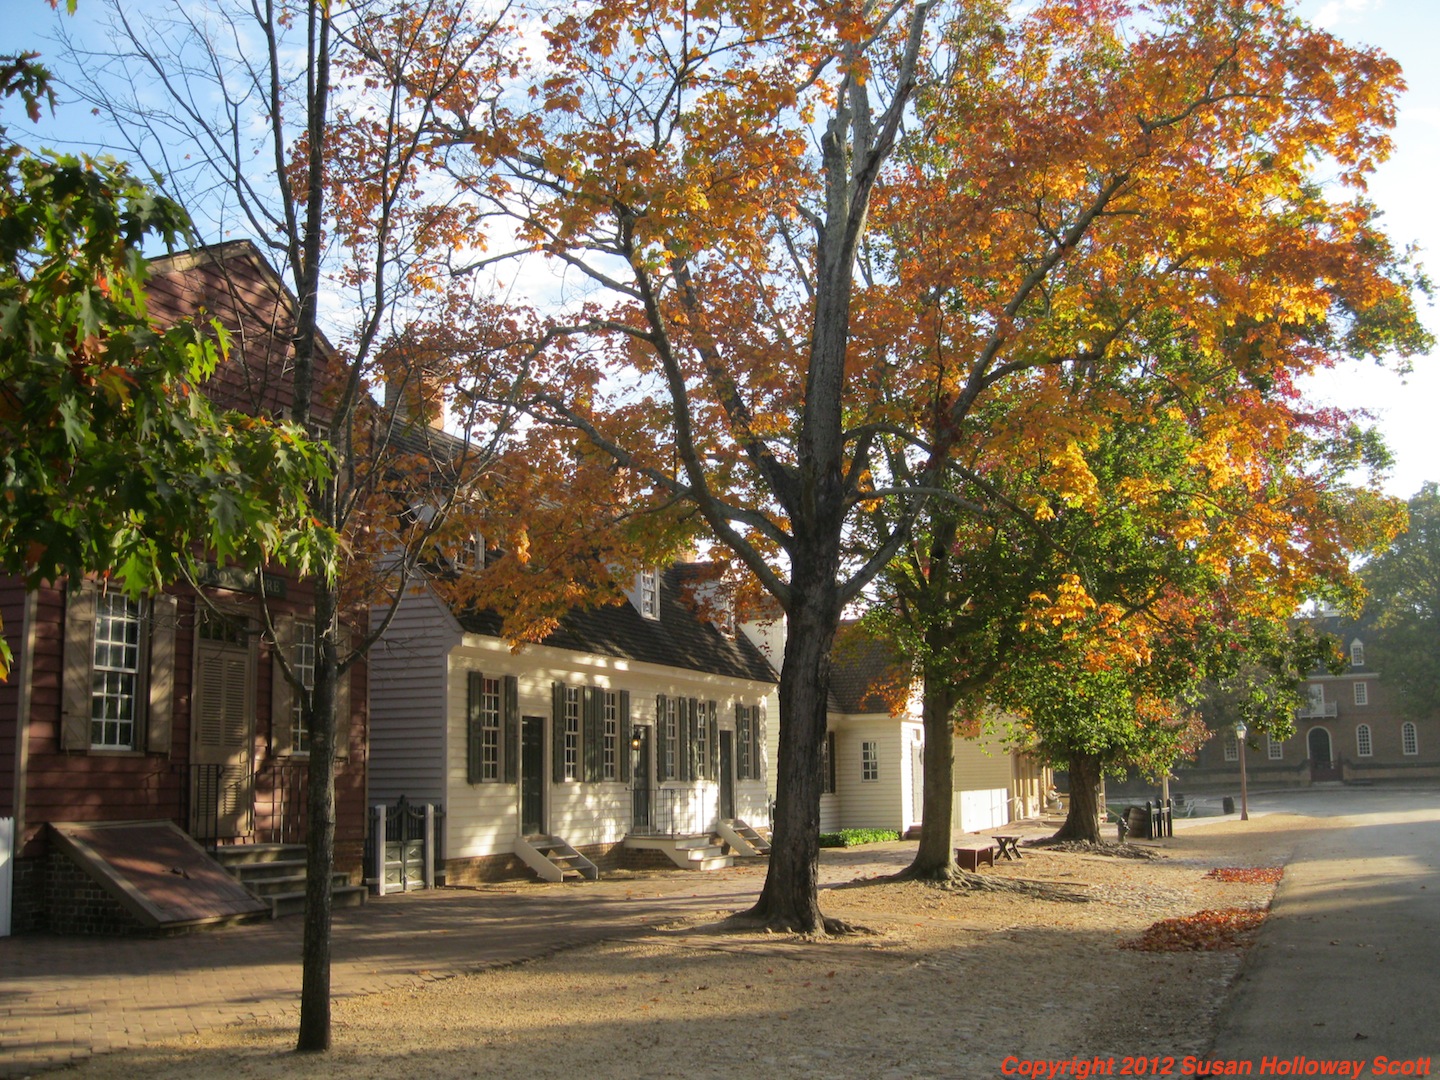 Two Nerdy History Girls: Another Fall Morning, Colonial Williamsburg